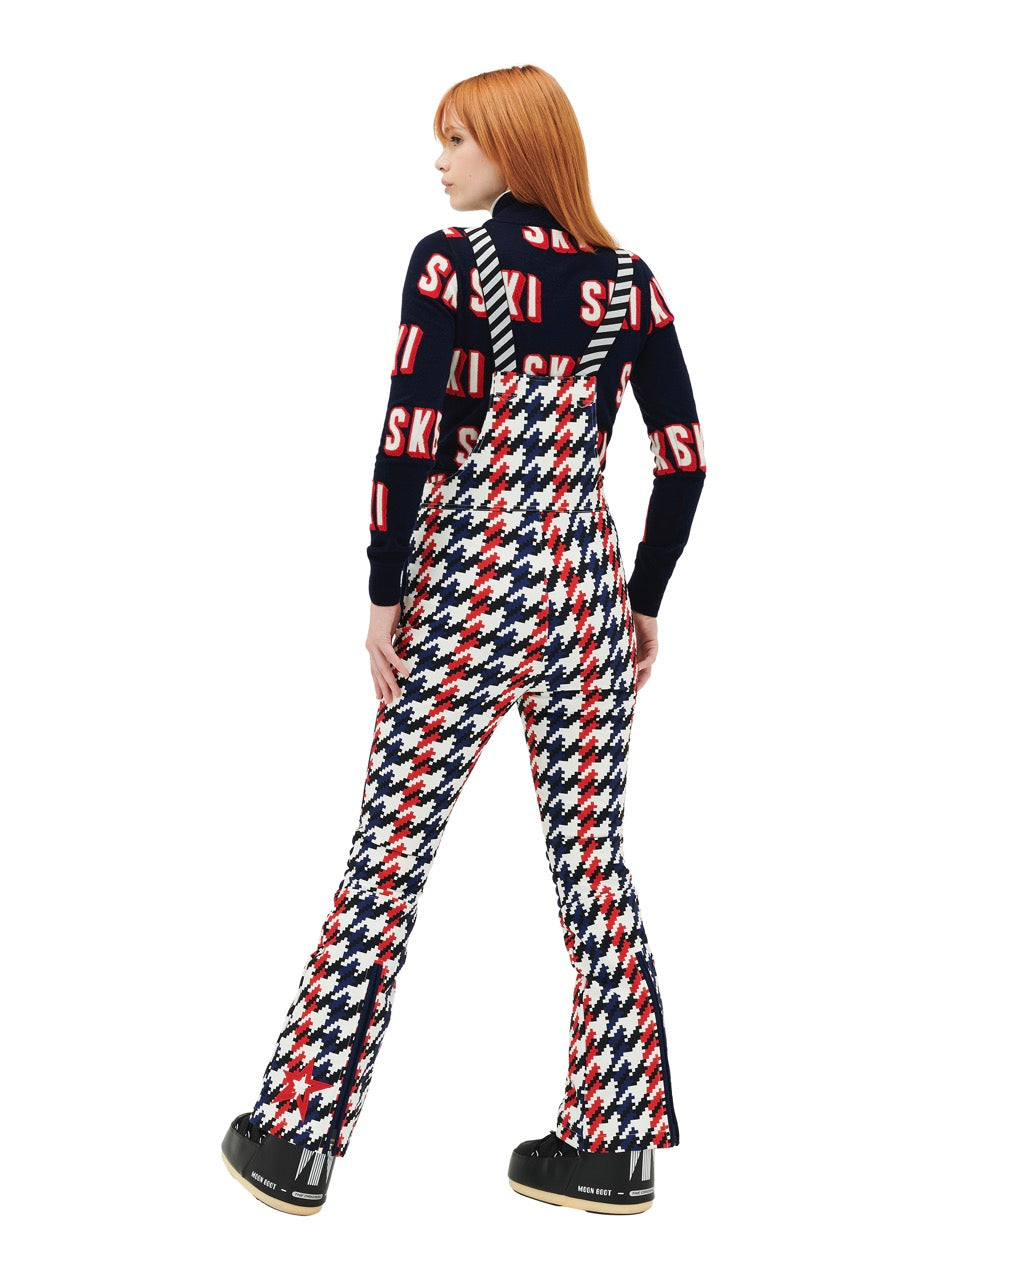 Perfect Moment Women's Houndstooth Isola San Ski Pant - Red, White & Navy